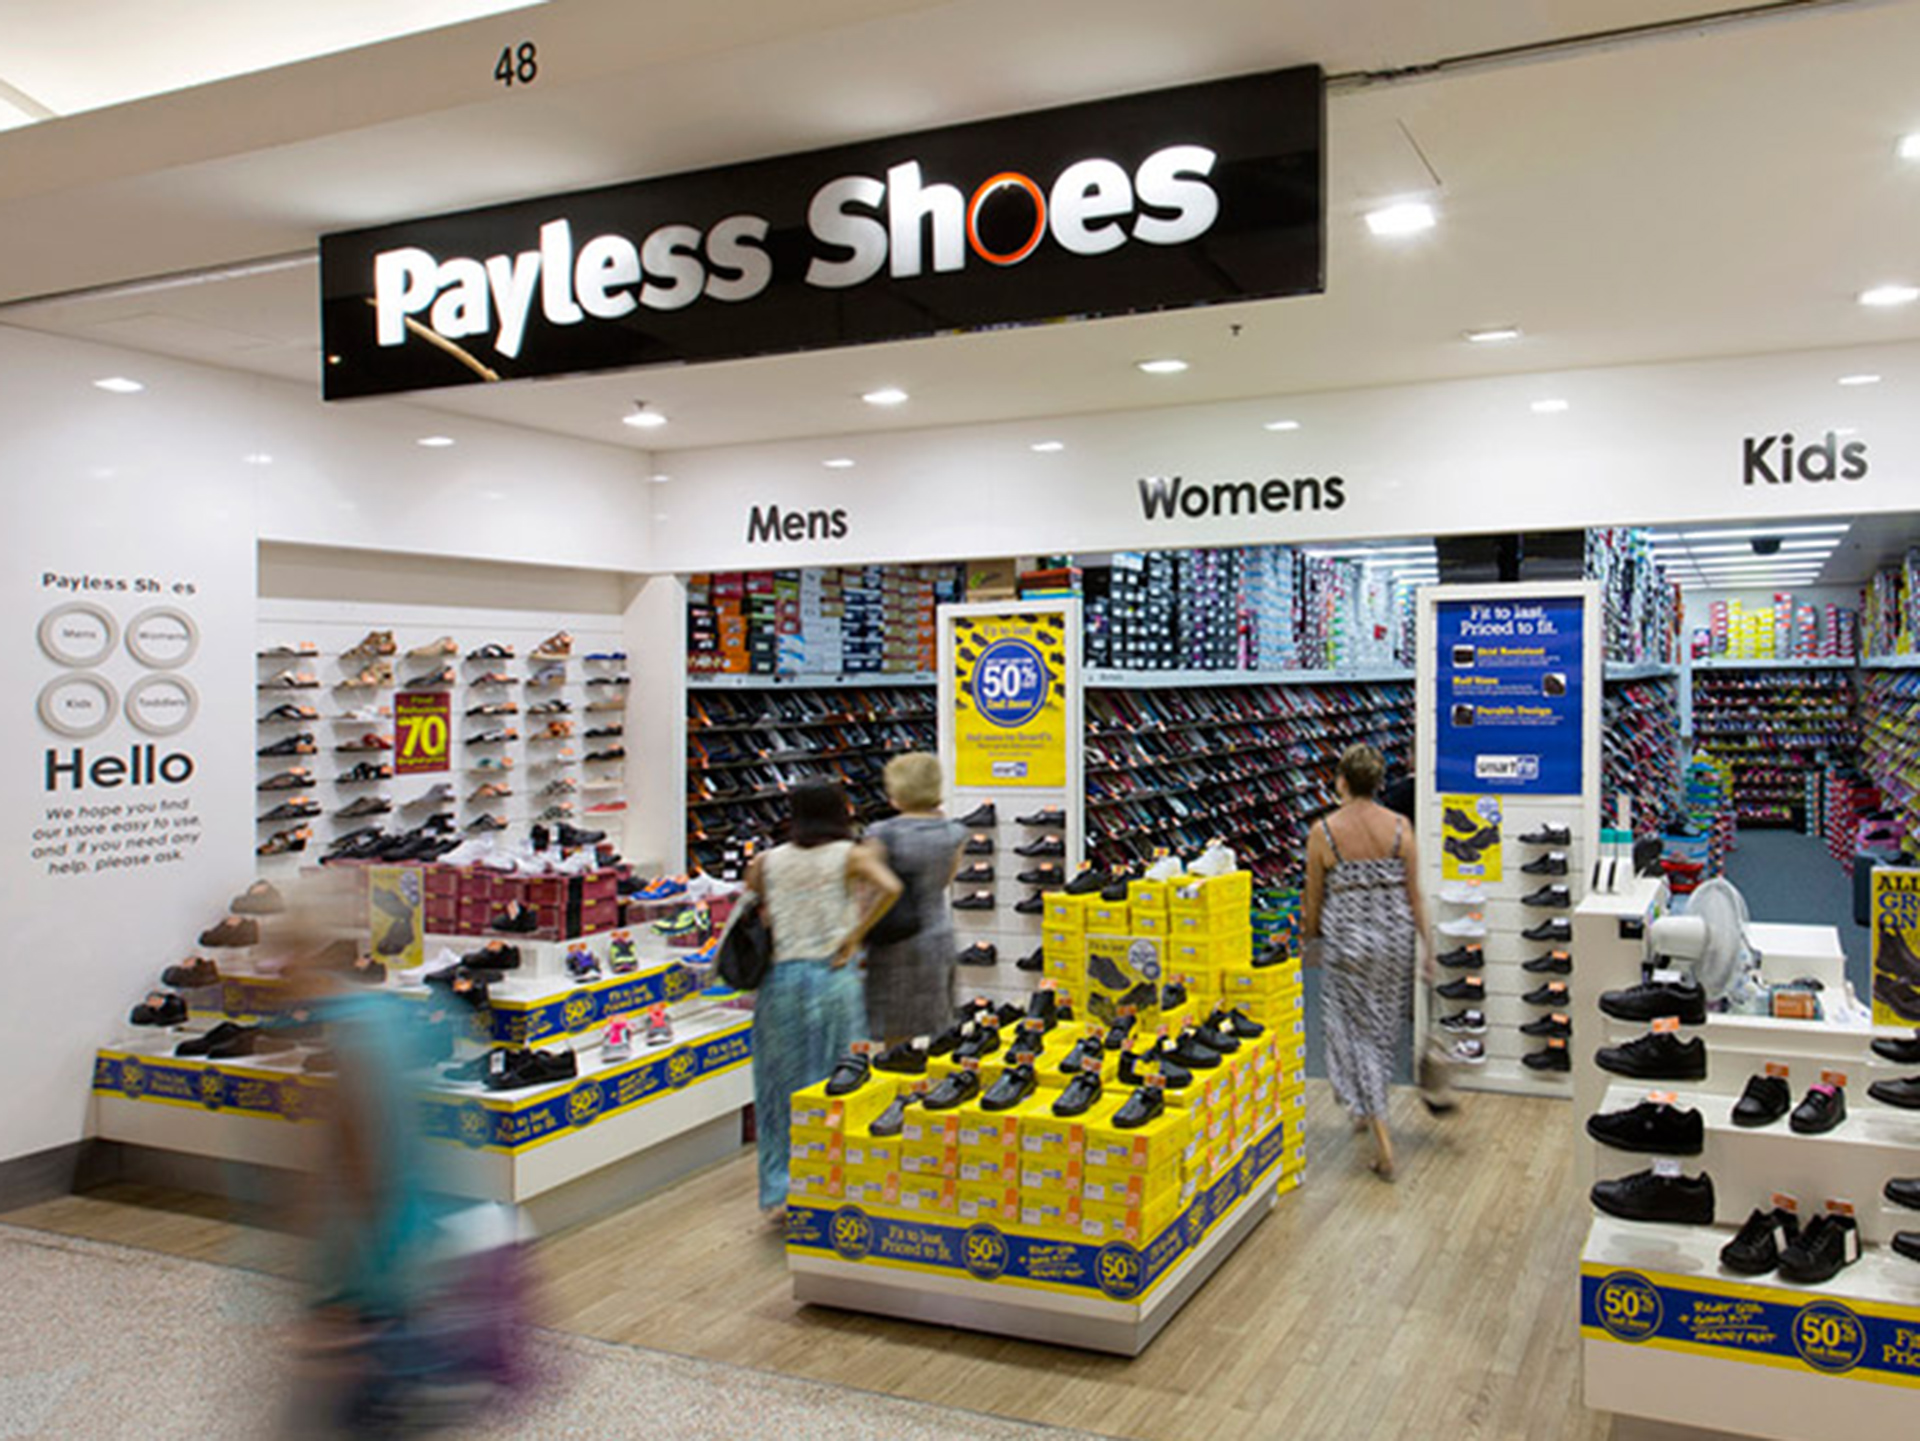 Payless Shoes to shut all its stores by February 